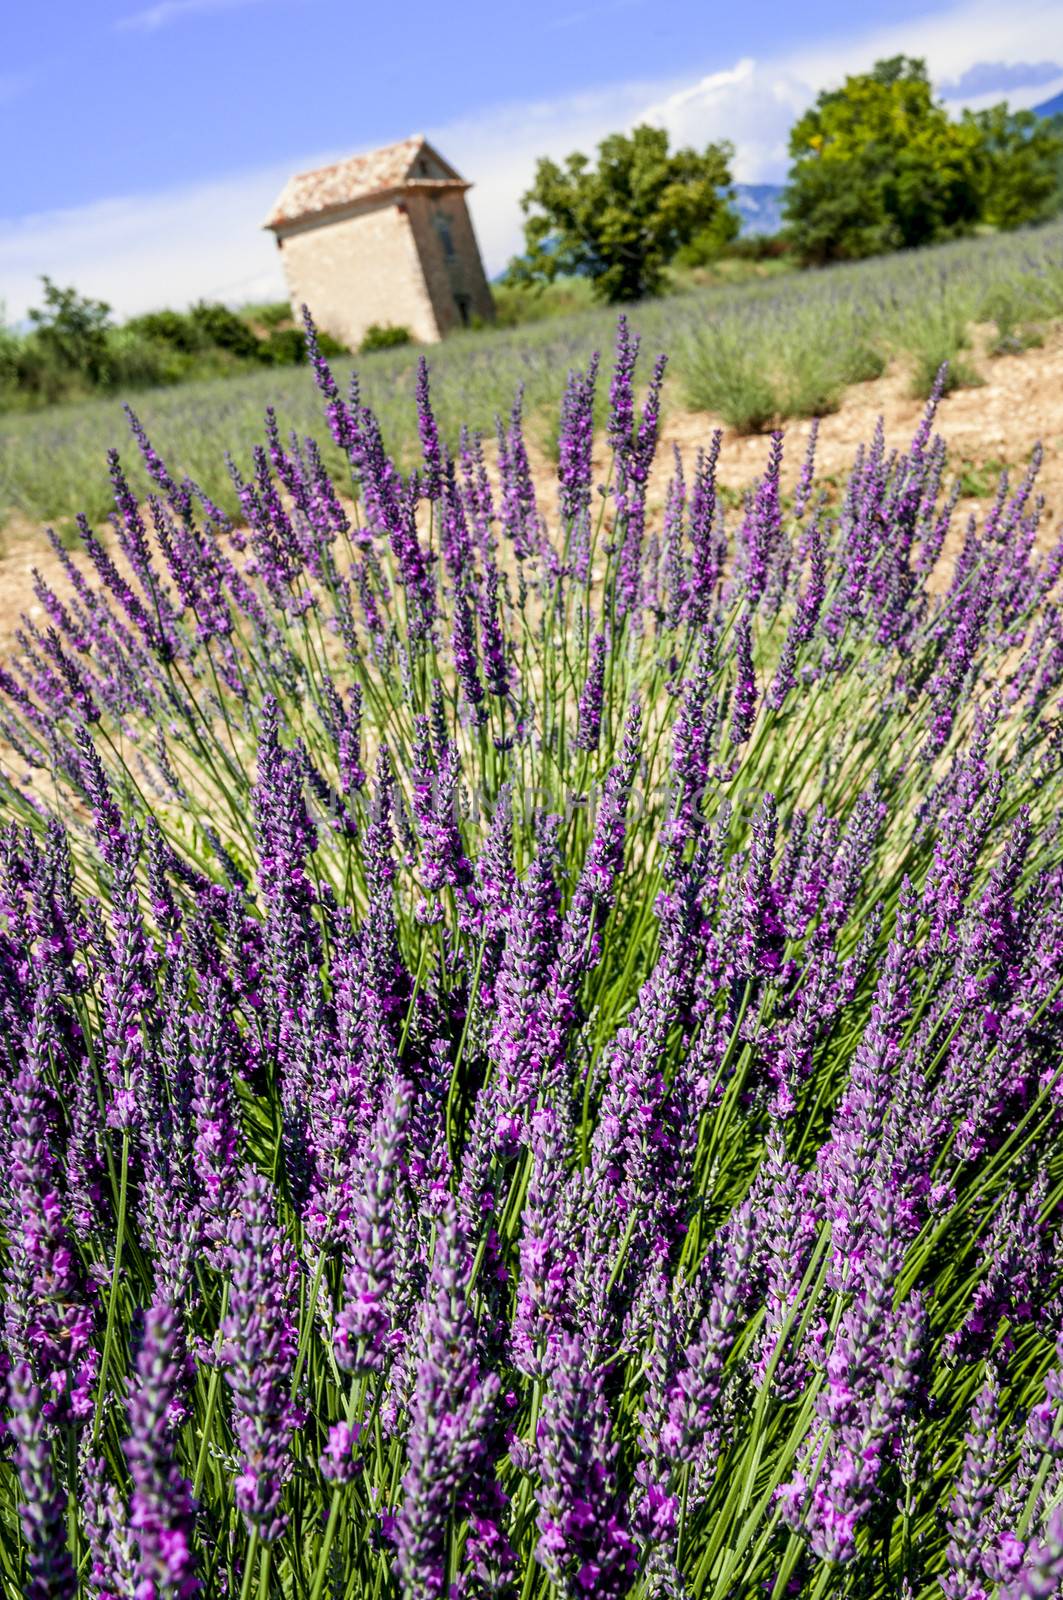 Image shows a lavender field in the region of Provence, southern France